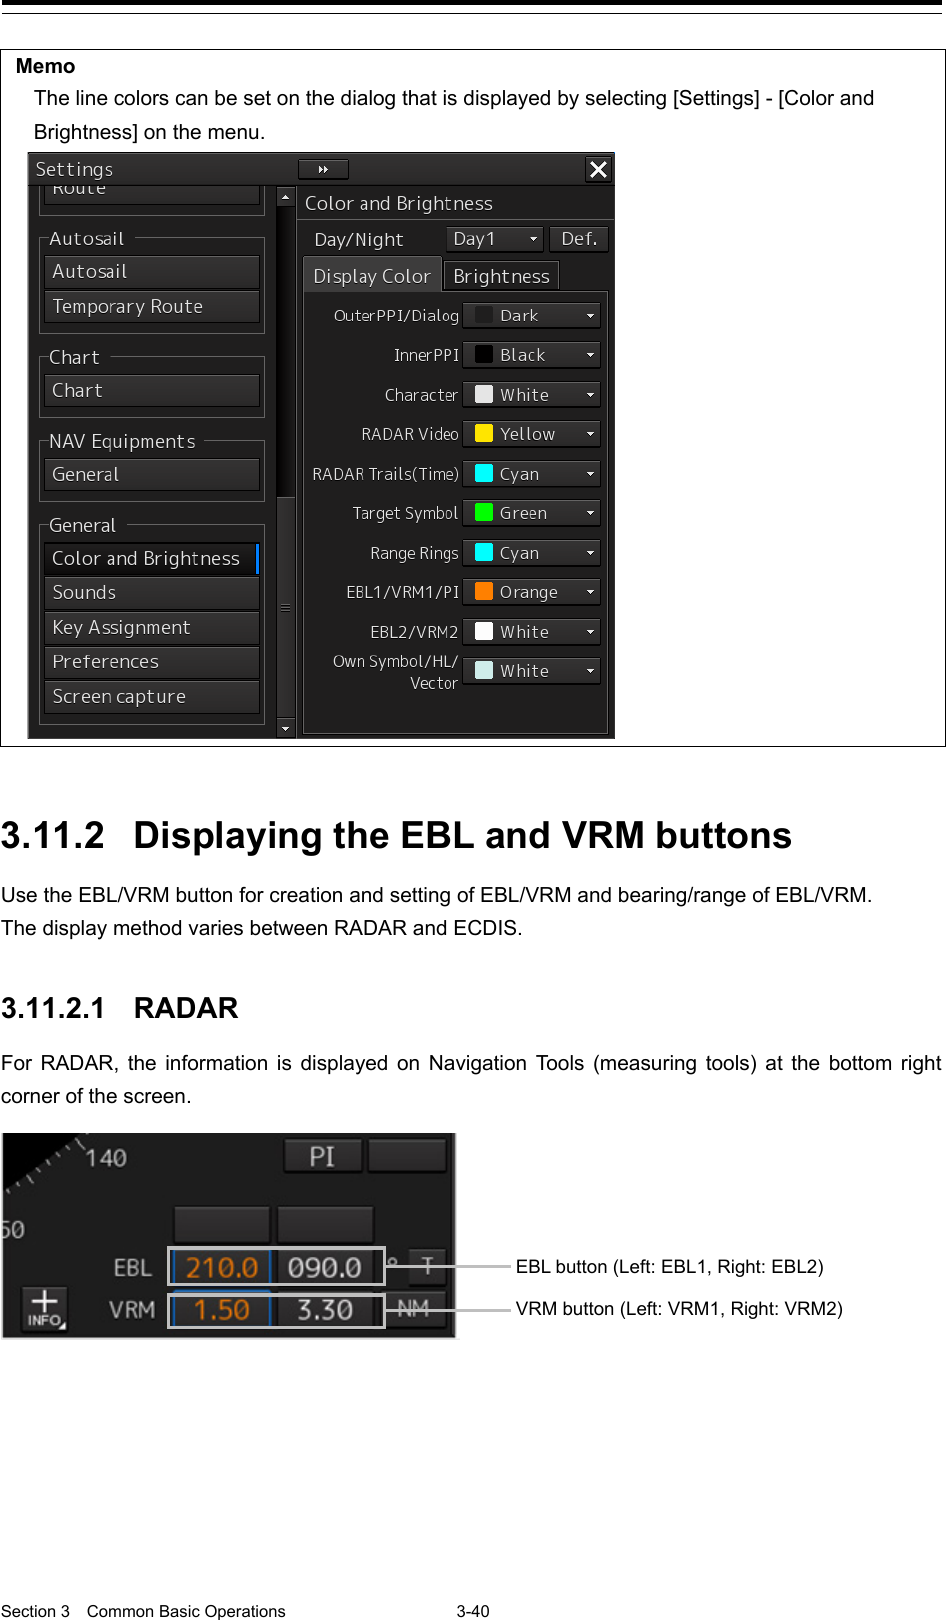  Section 3  Common Basic Operations  3-40  Memo The line colors can be set on the dialog that is displayed by selecting [Settings] - [Color and Brightness] on the menu.    3.11.2 Displaying the EBL and VRM buttons Use the EBL/VRM button for creation and setting of EBL/VRM and bearing/range of EBL/VRM. The display method varies between RADAR and ECDIS.   3.11.2.1 RADAR For RADAR, the information is displayed on Navigation Tools (measuring tools) at the bottom right corner of the screen.       EBL button (Left: EBL1, Right: EBL2) VRM button (Left: VRM1, Right: VRM2) 